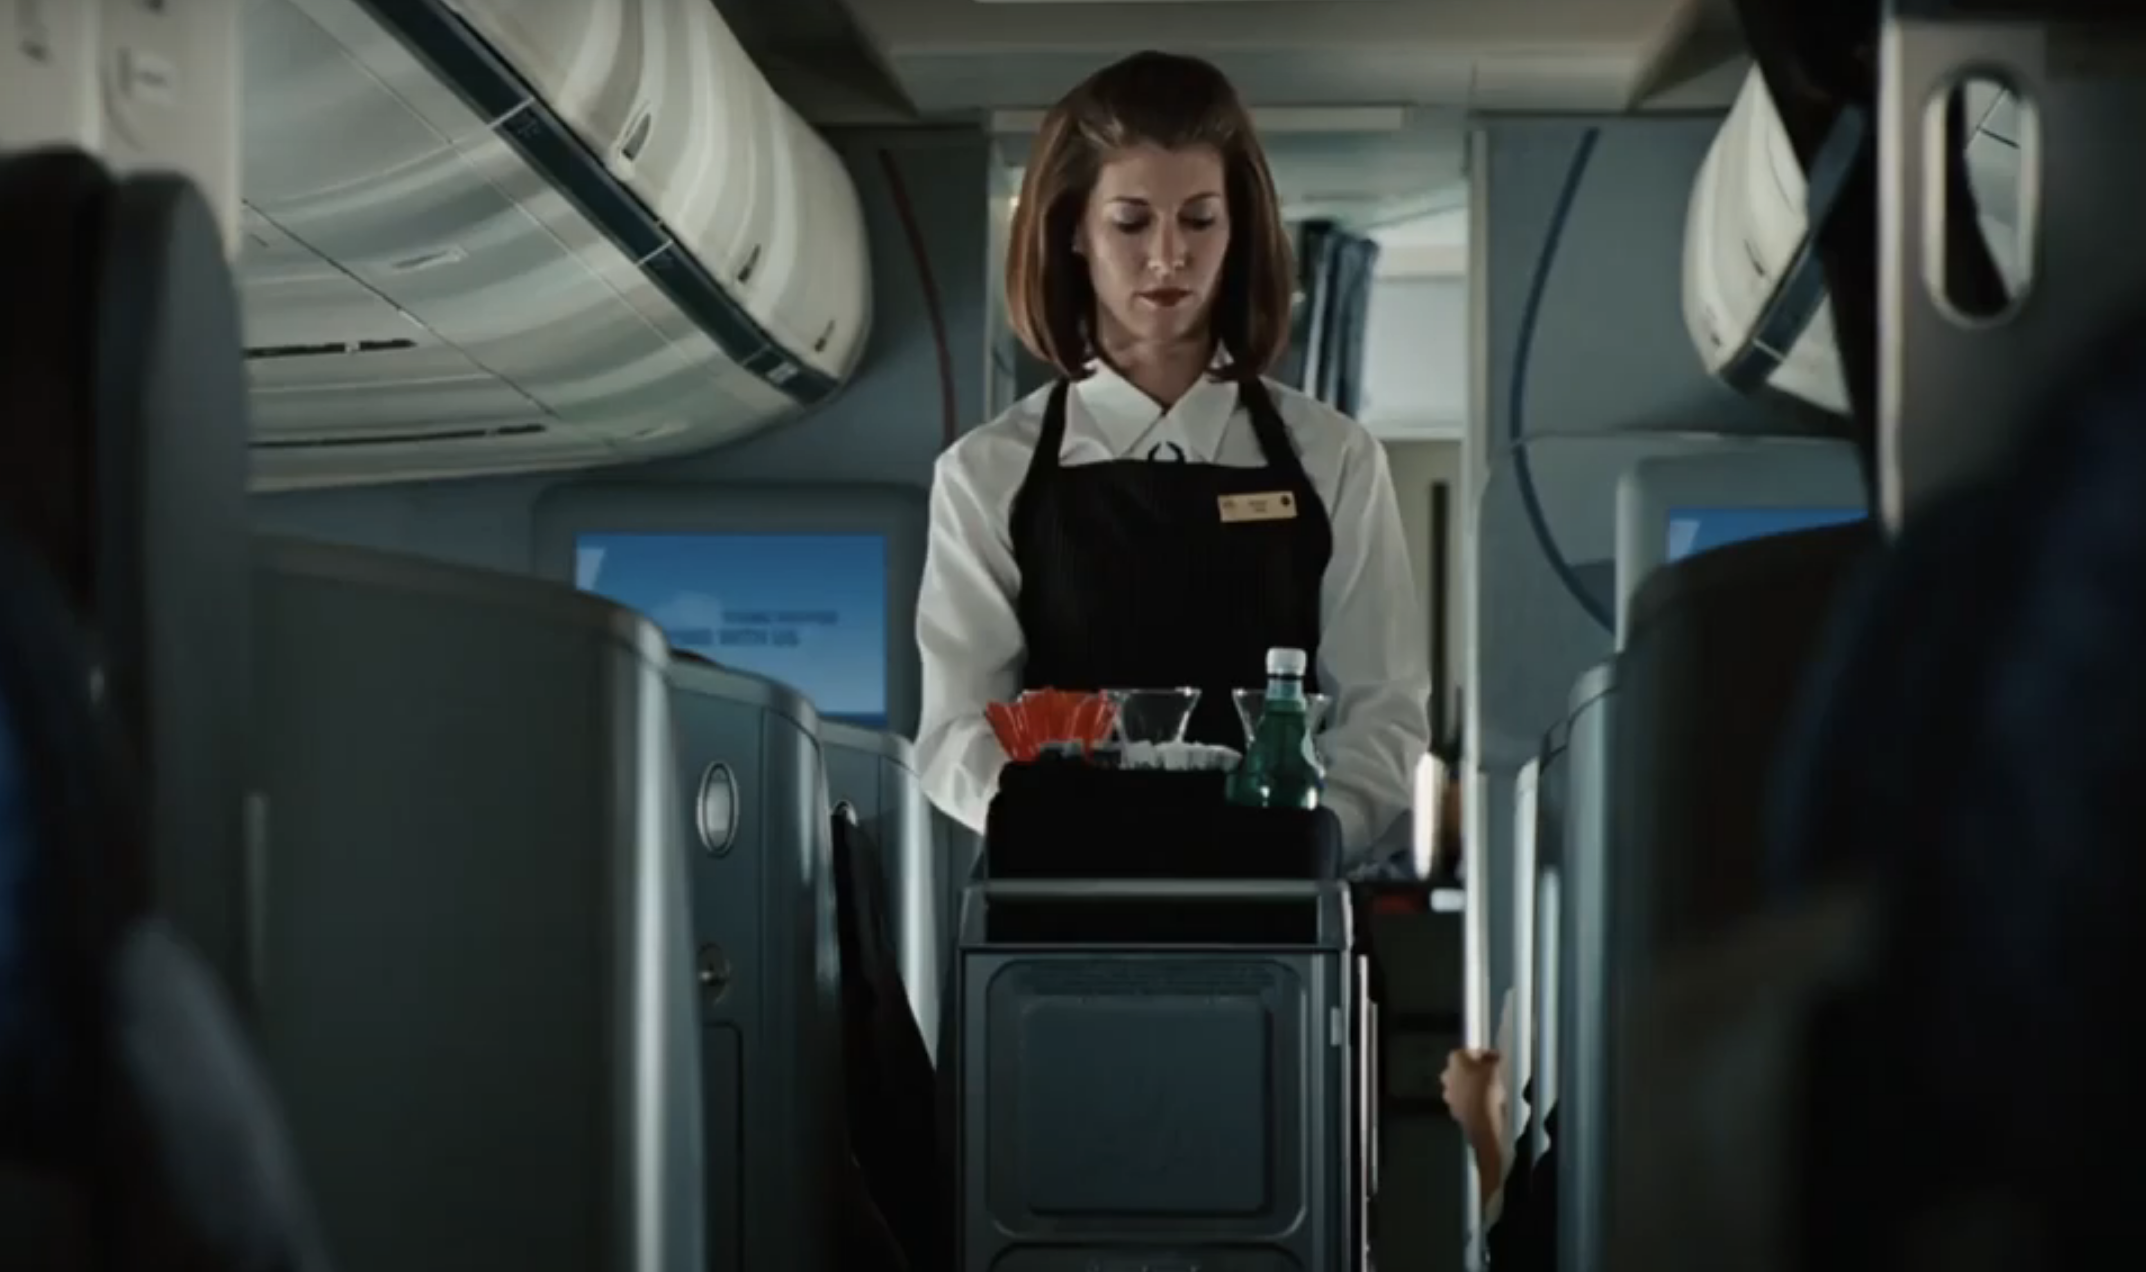 A flight attendant serving drinks in &quot;Up in the Air&quot;